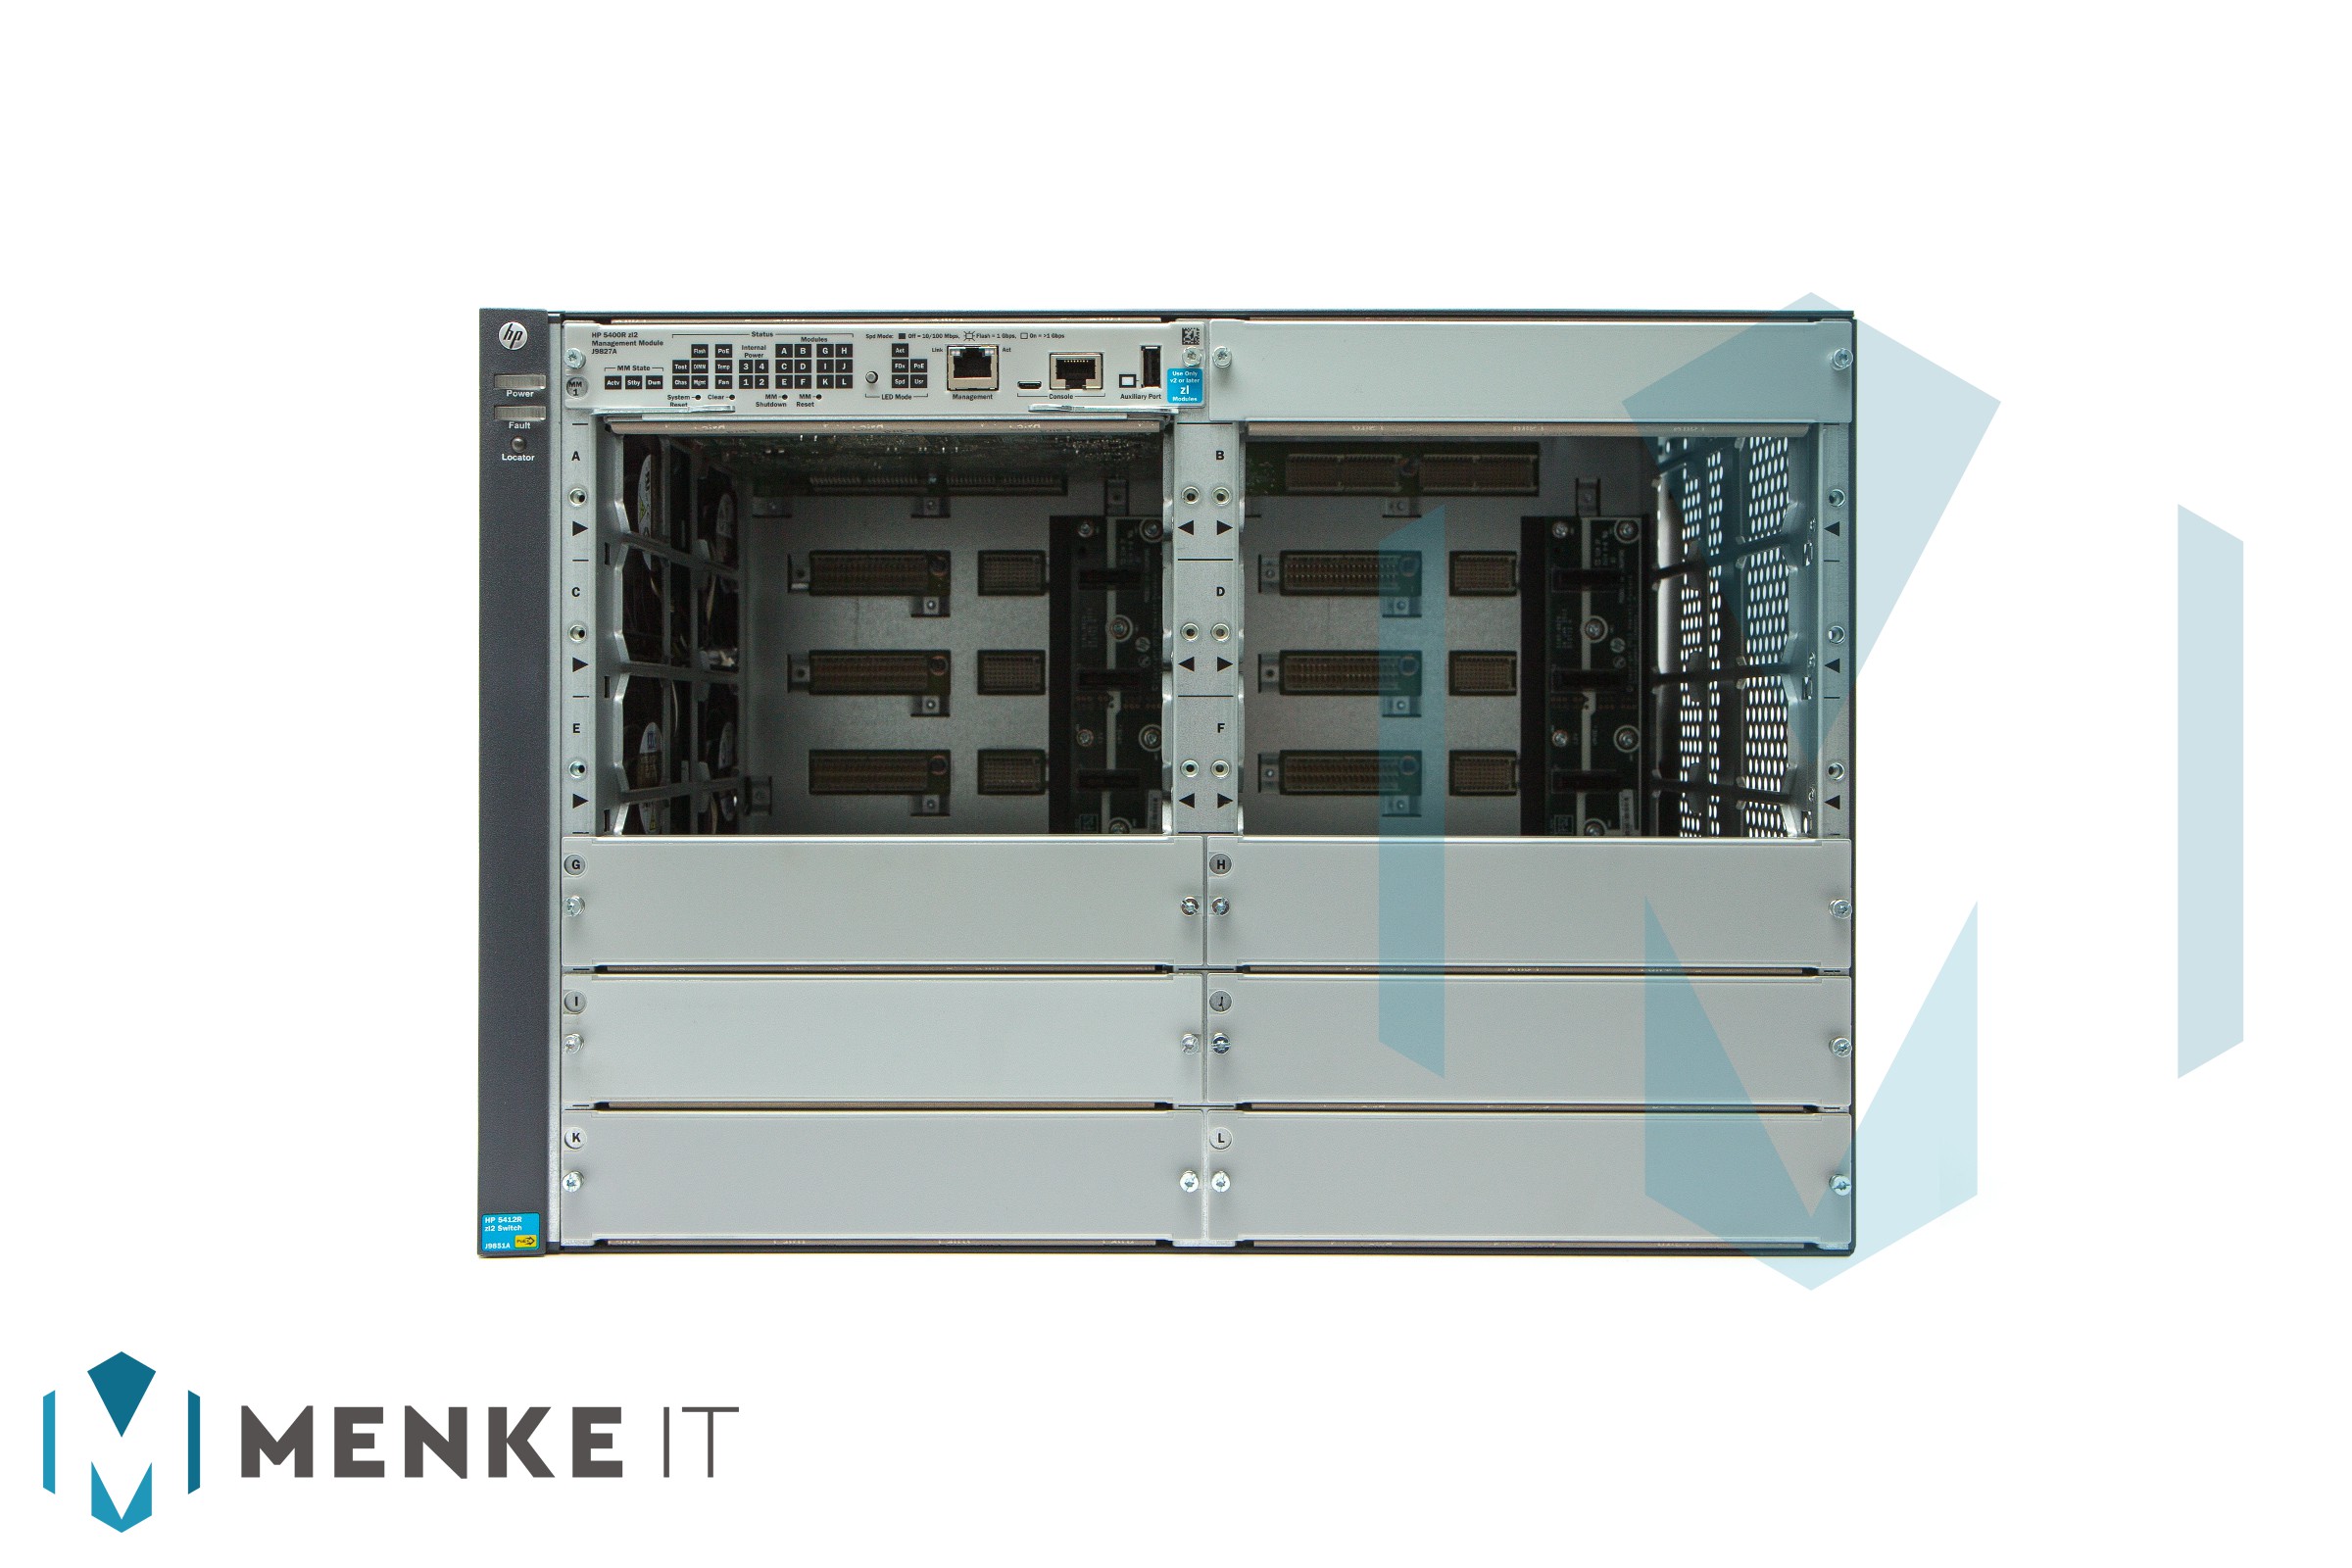 HPE 5412R zl2 Switch Chassis J9822A